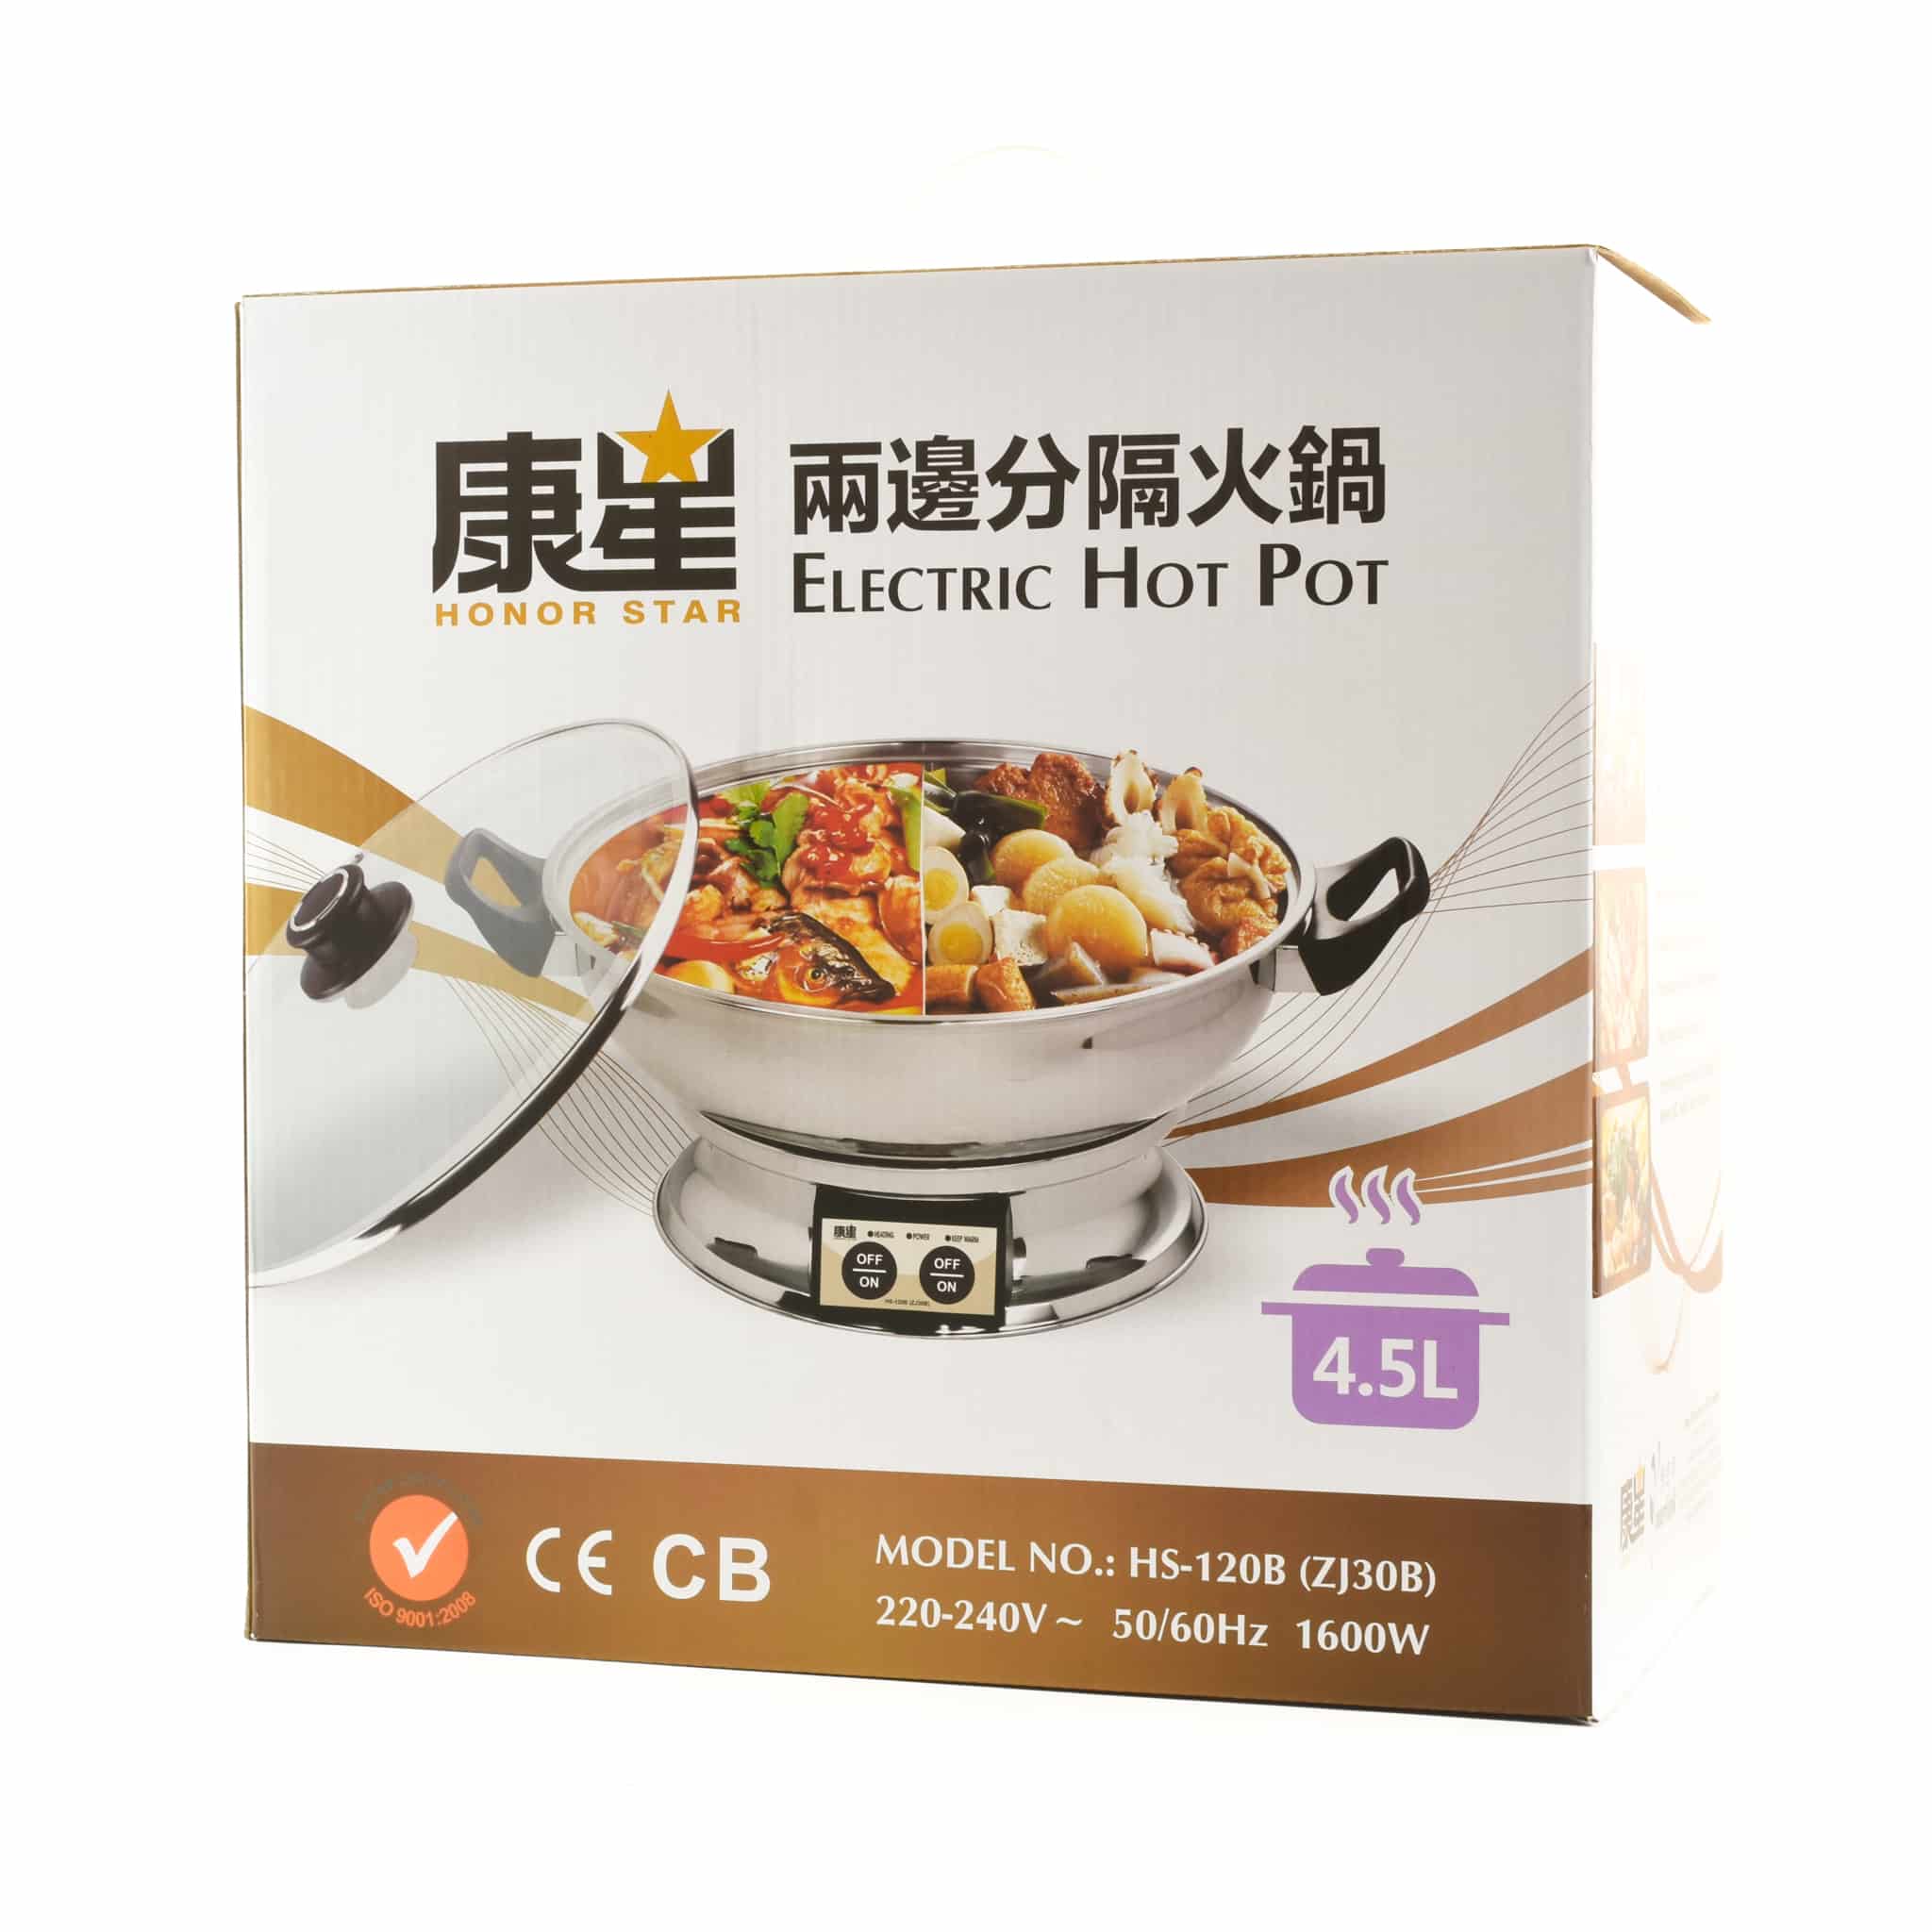 Table Top Chinese Hot Pot 4.5 litres, Serve 6-8